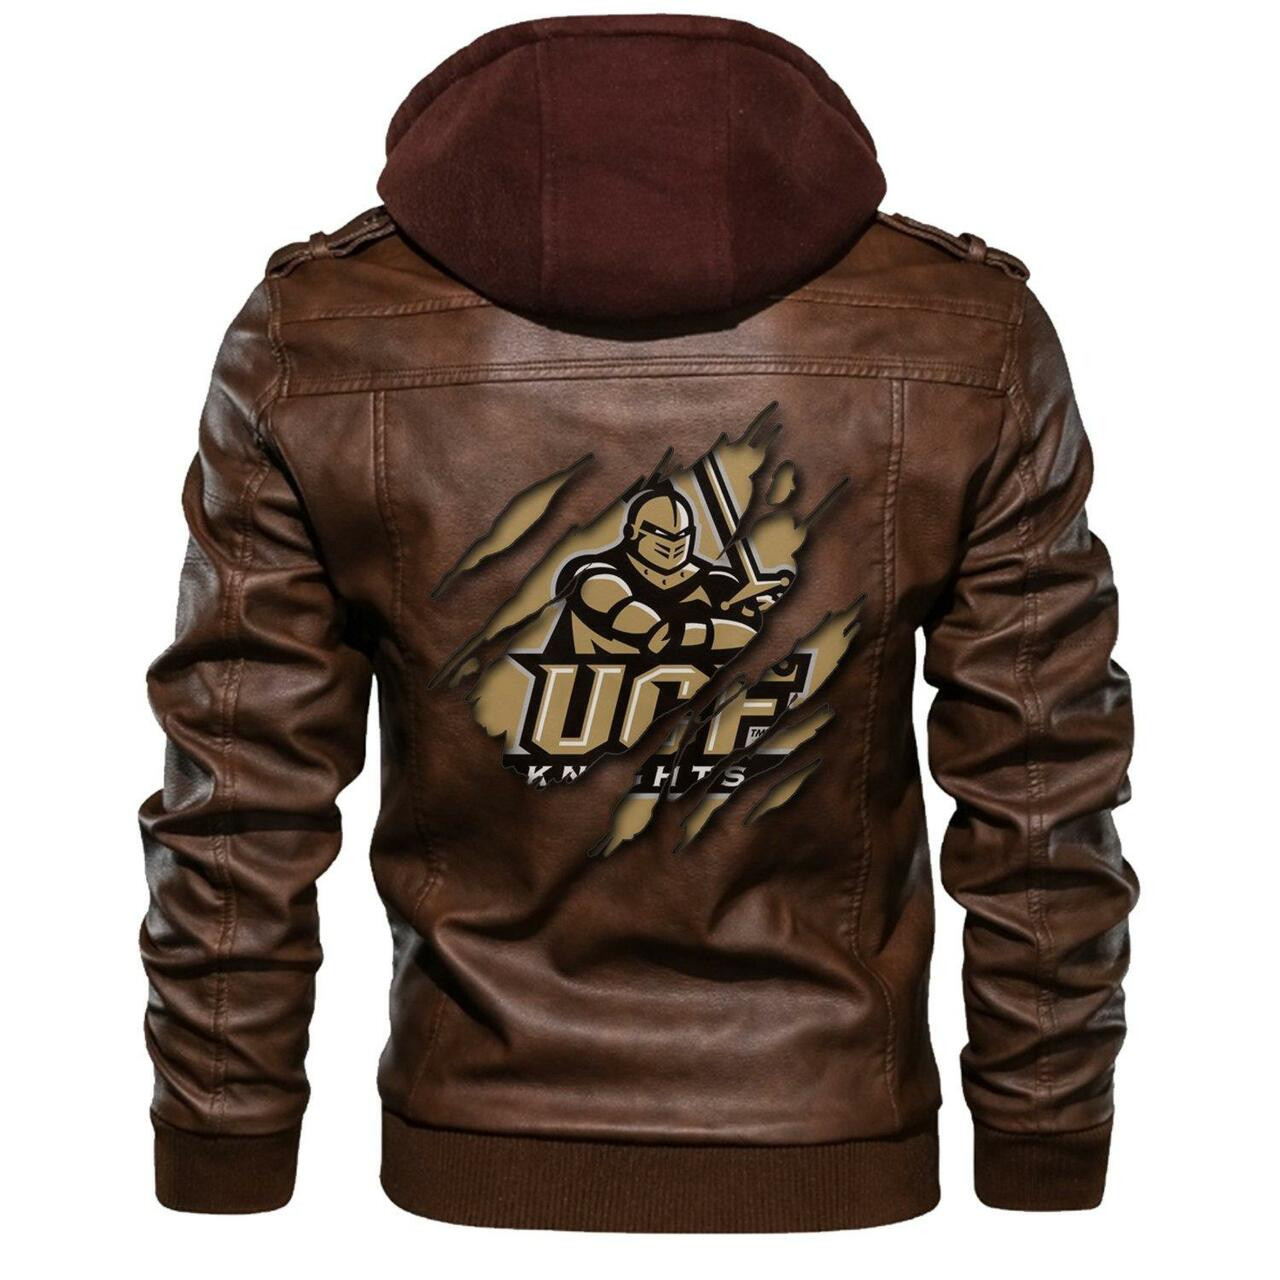 Check out and find the right leather jacket below 146